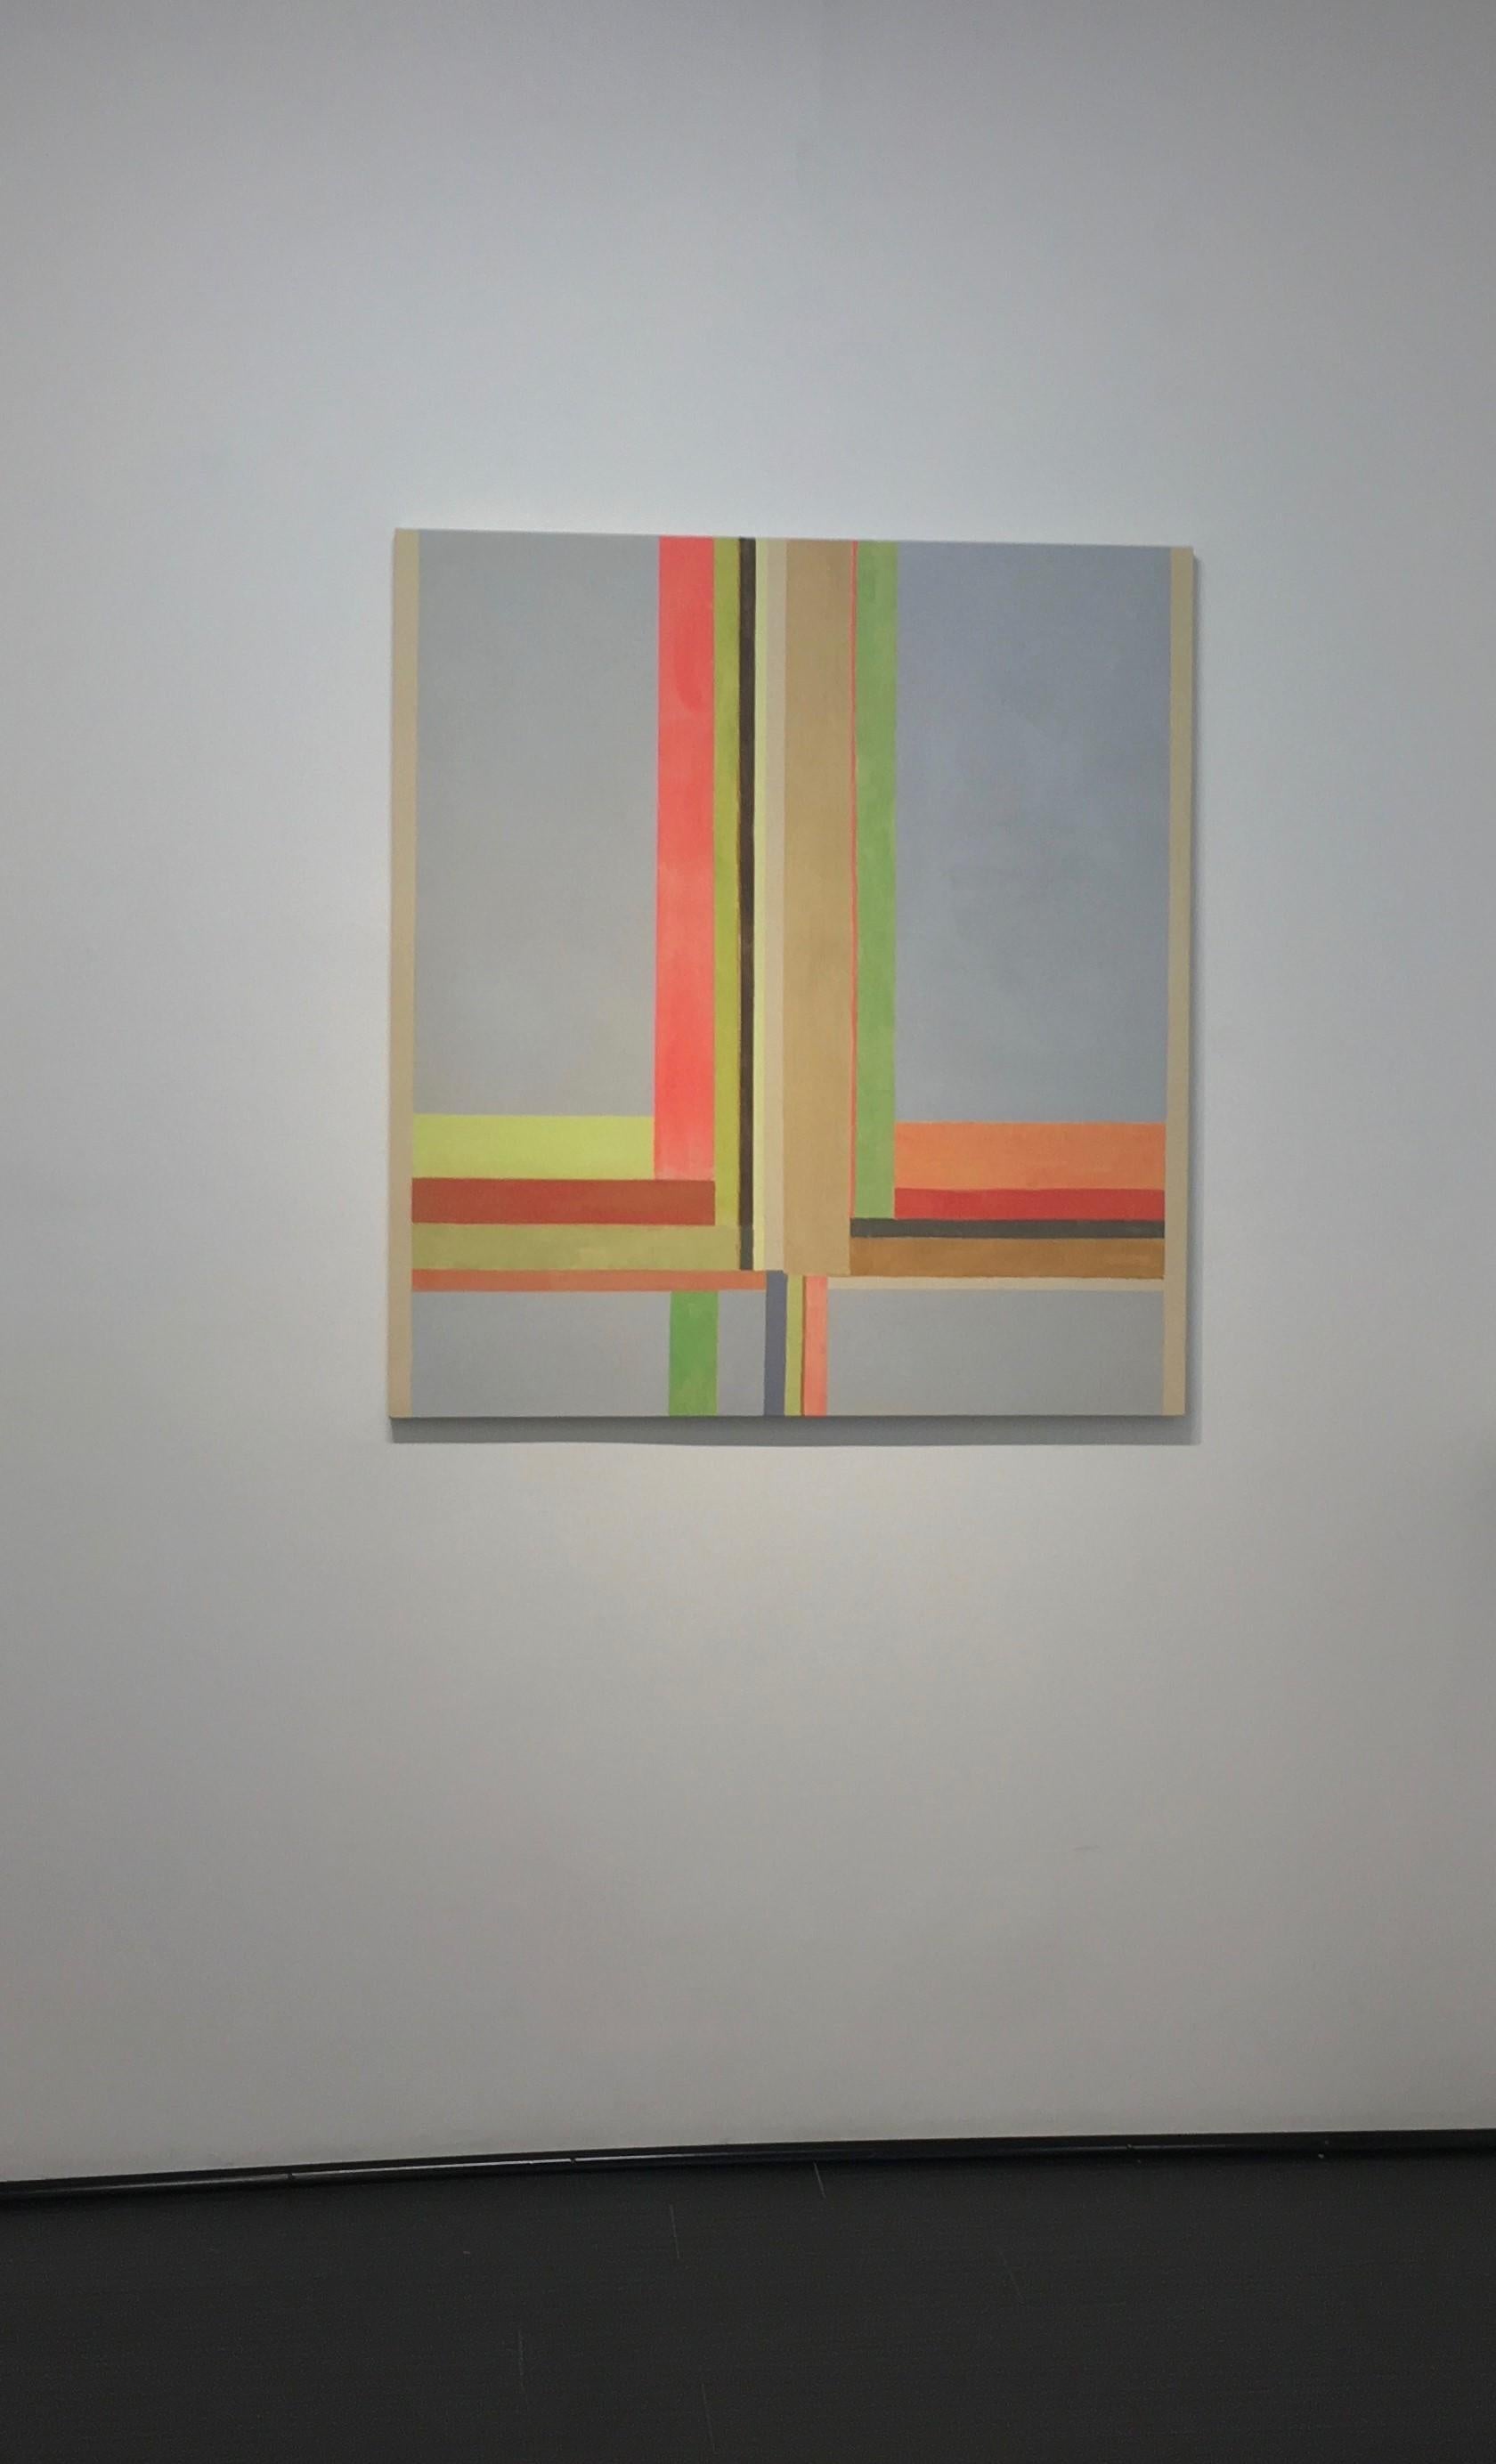 Duende Three, Stripes Beige, Orange, Yellow, Red, Green, Gray - Painting by Elizabeth Gourlay